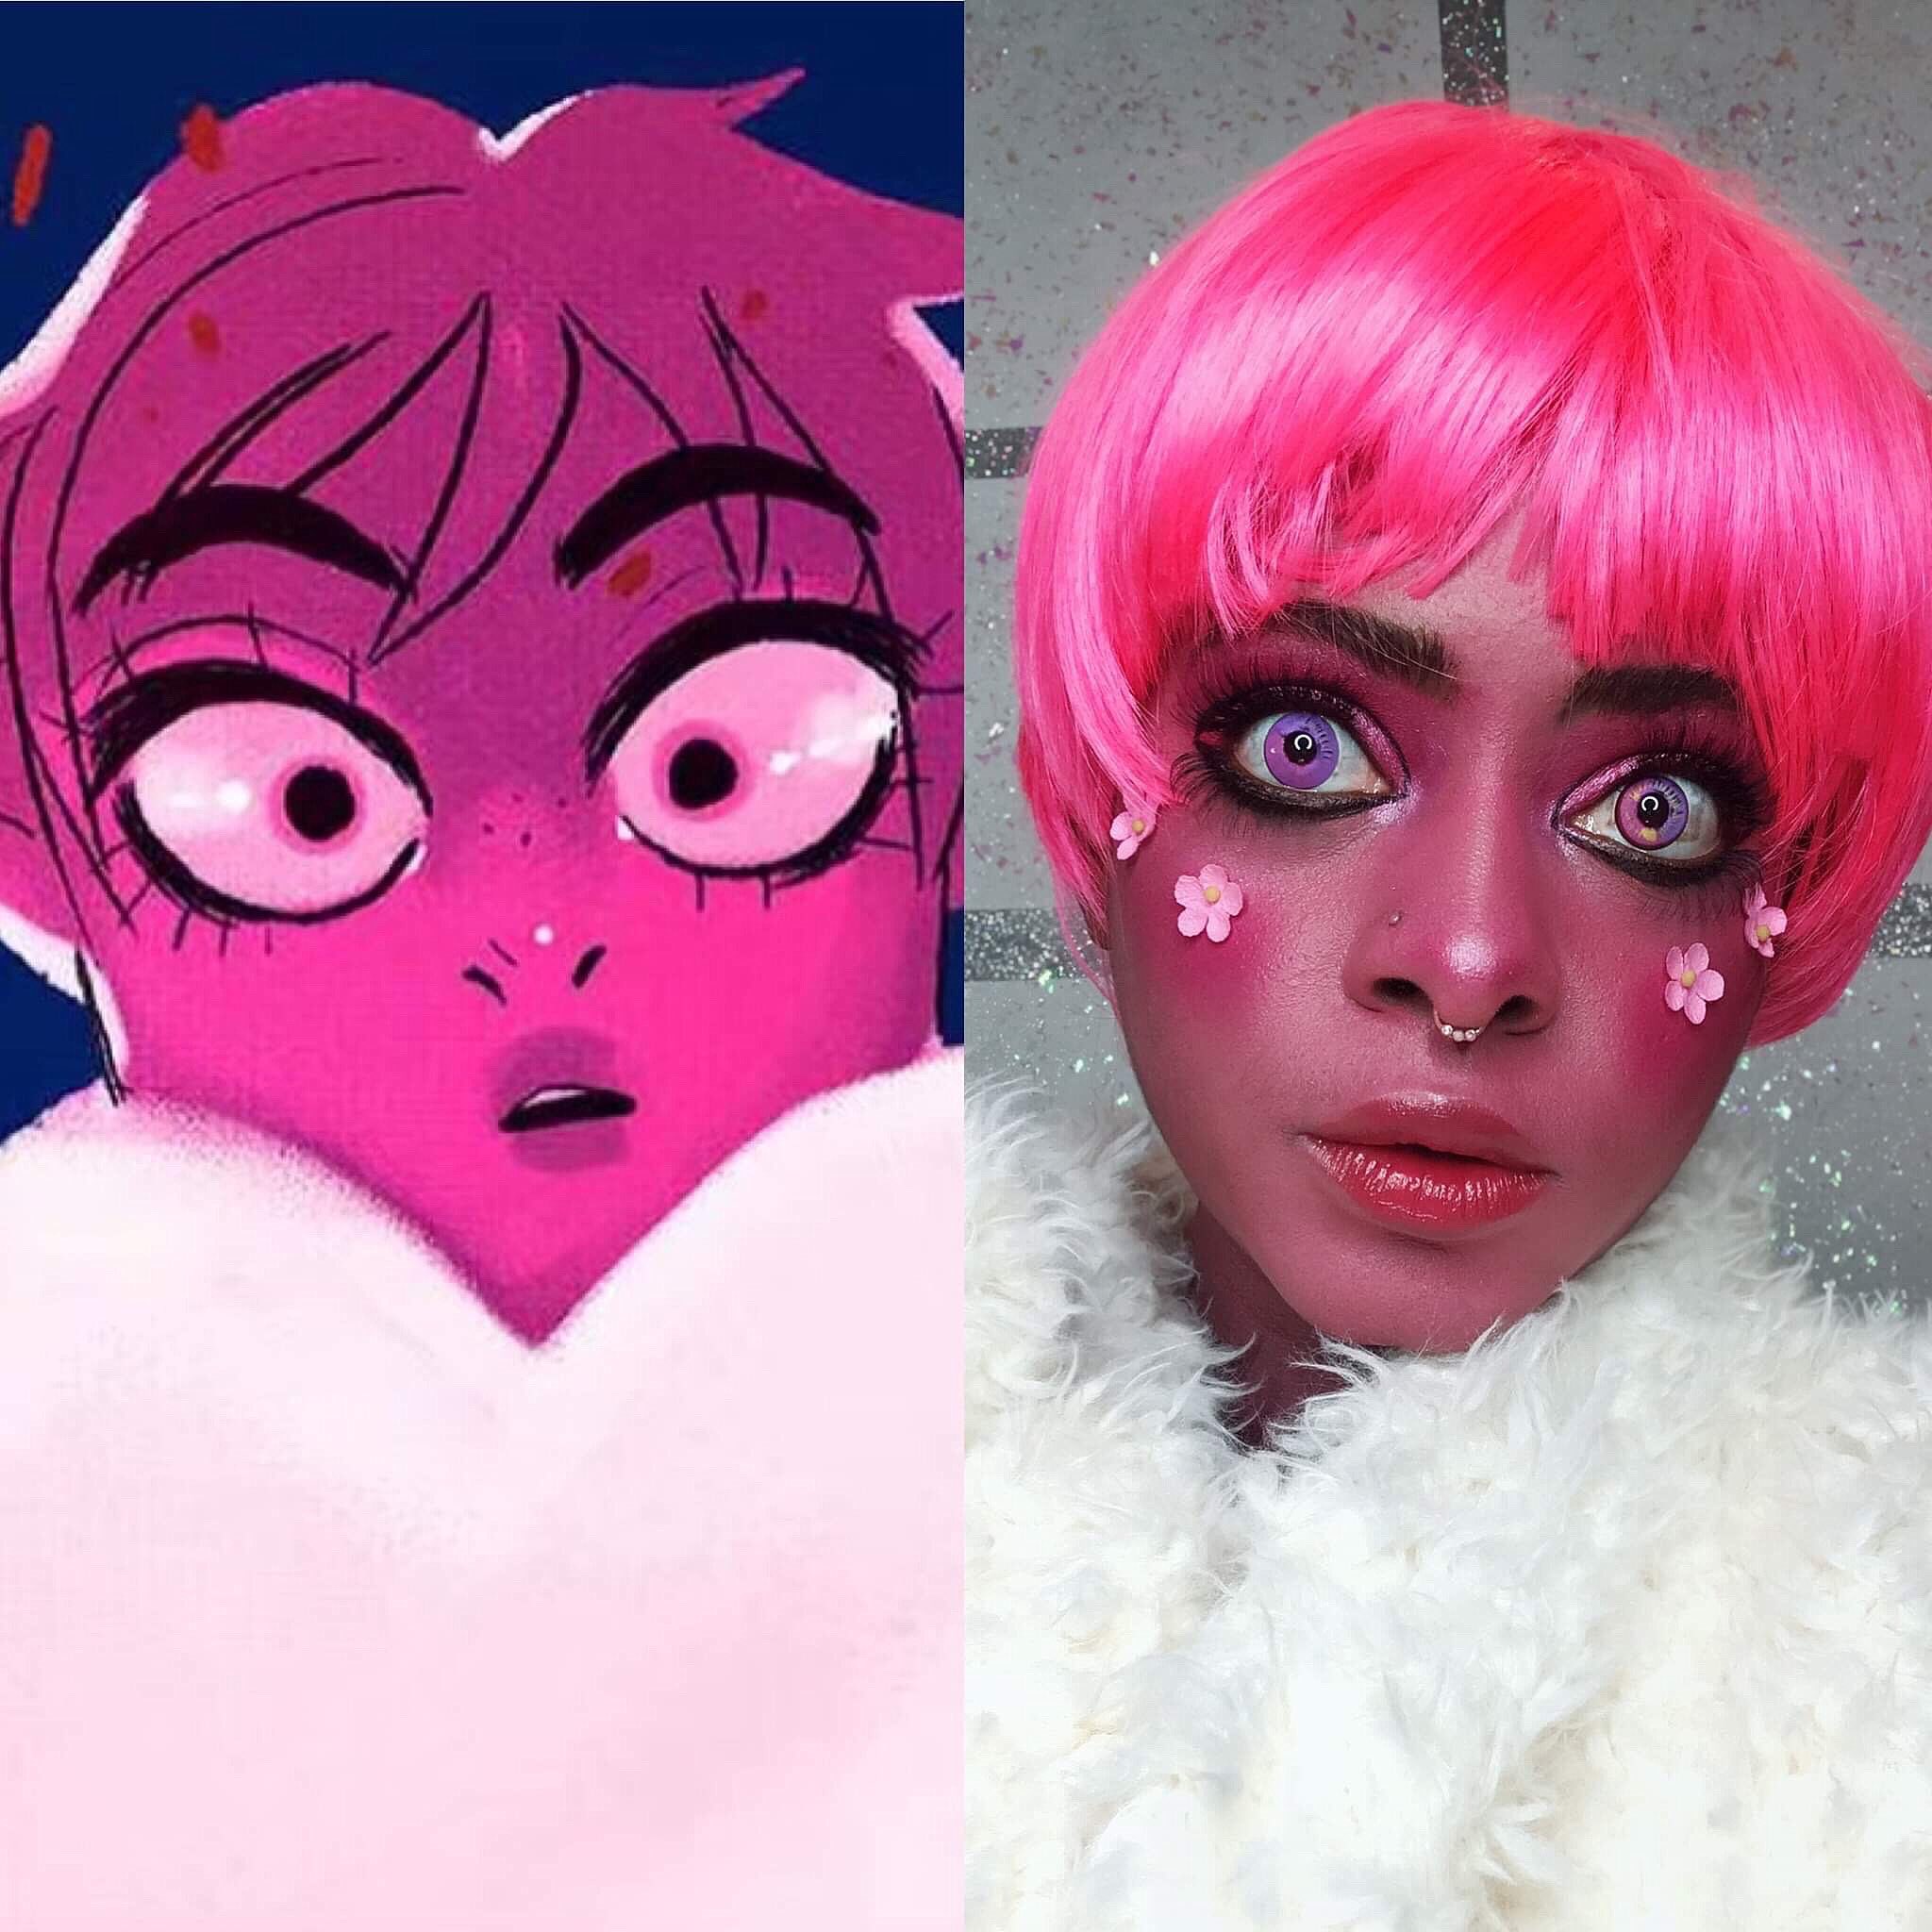 A side-by-side comparison of DeLa Doll's Persephone cosplay next to the character from the Lore Olympus webseries